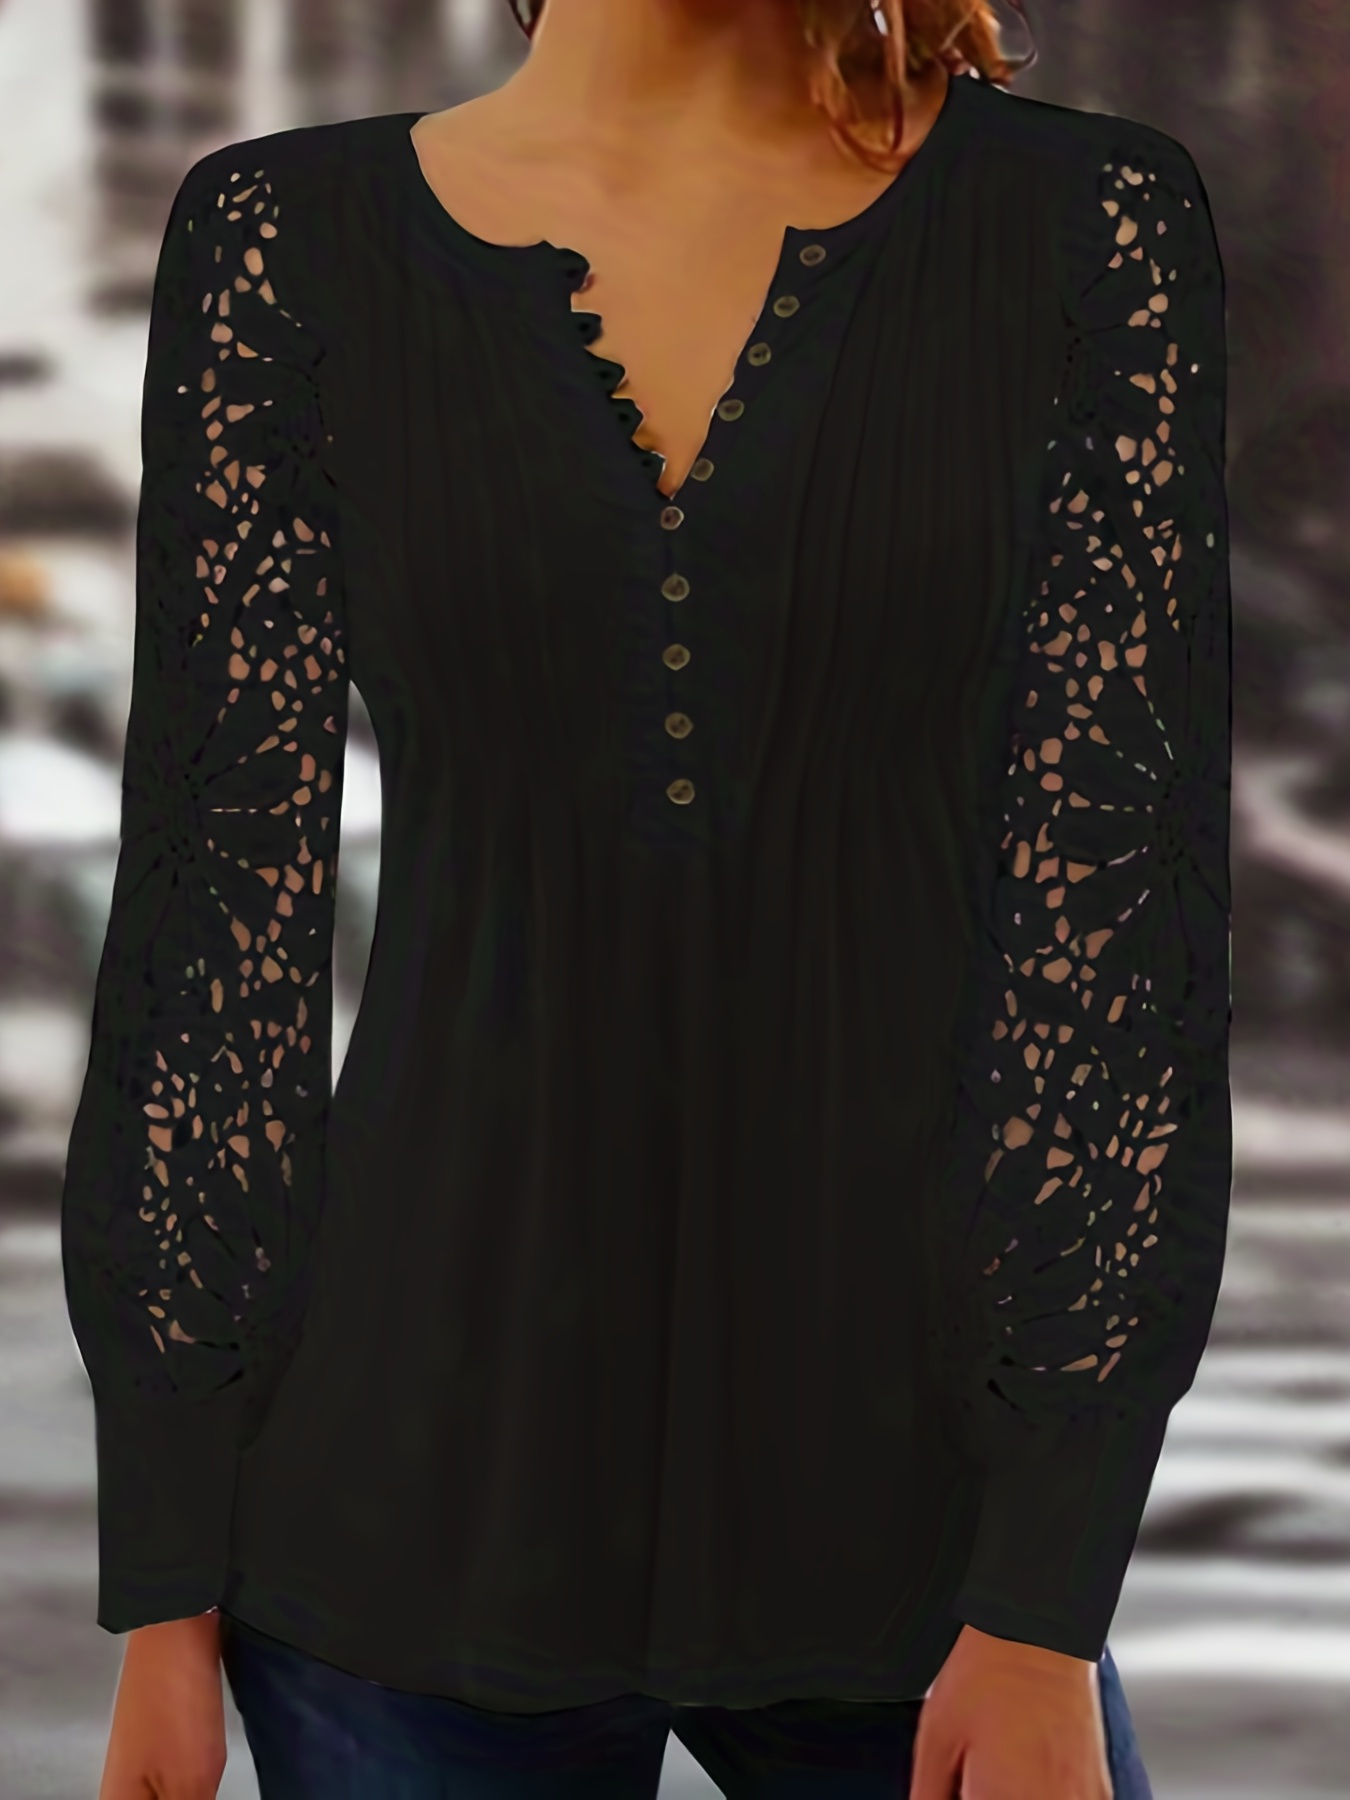 Black Lace Tops, Tops, Shirts, Blouses